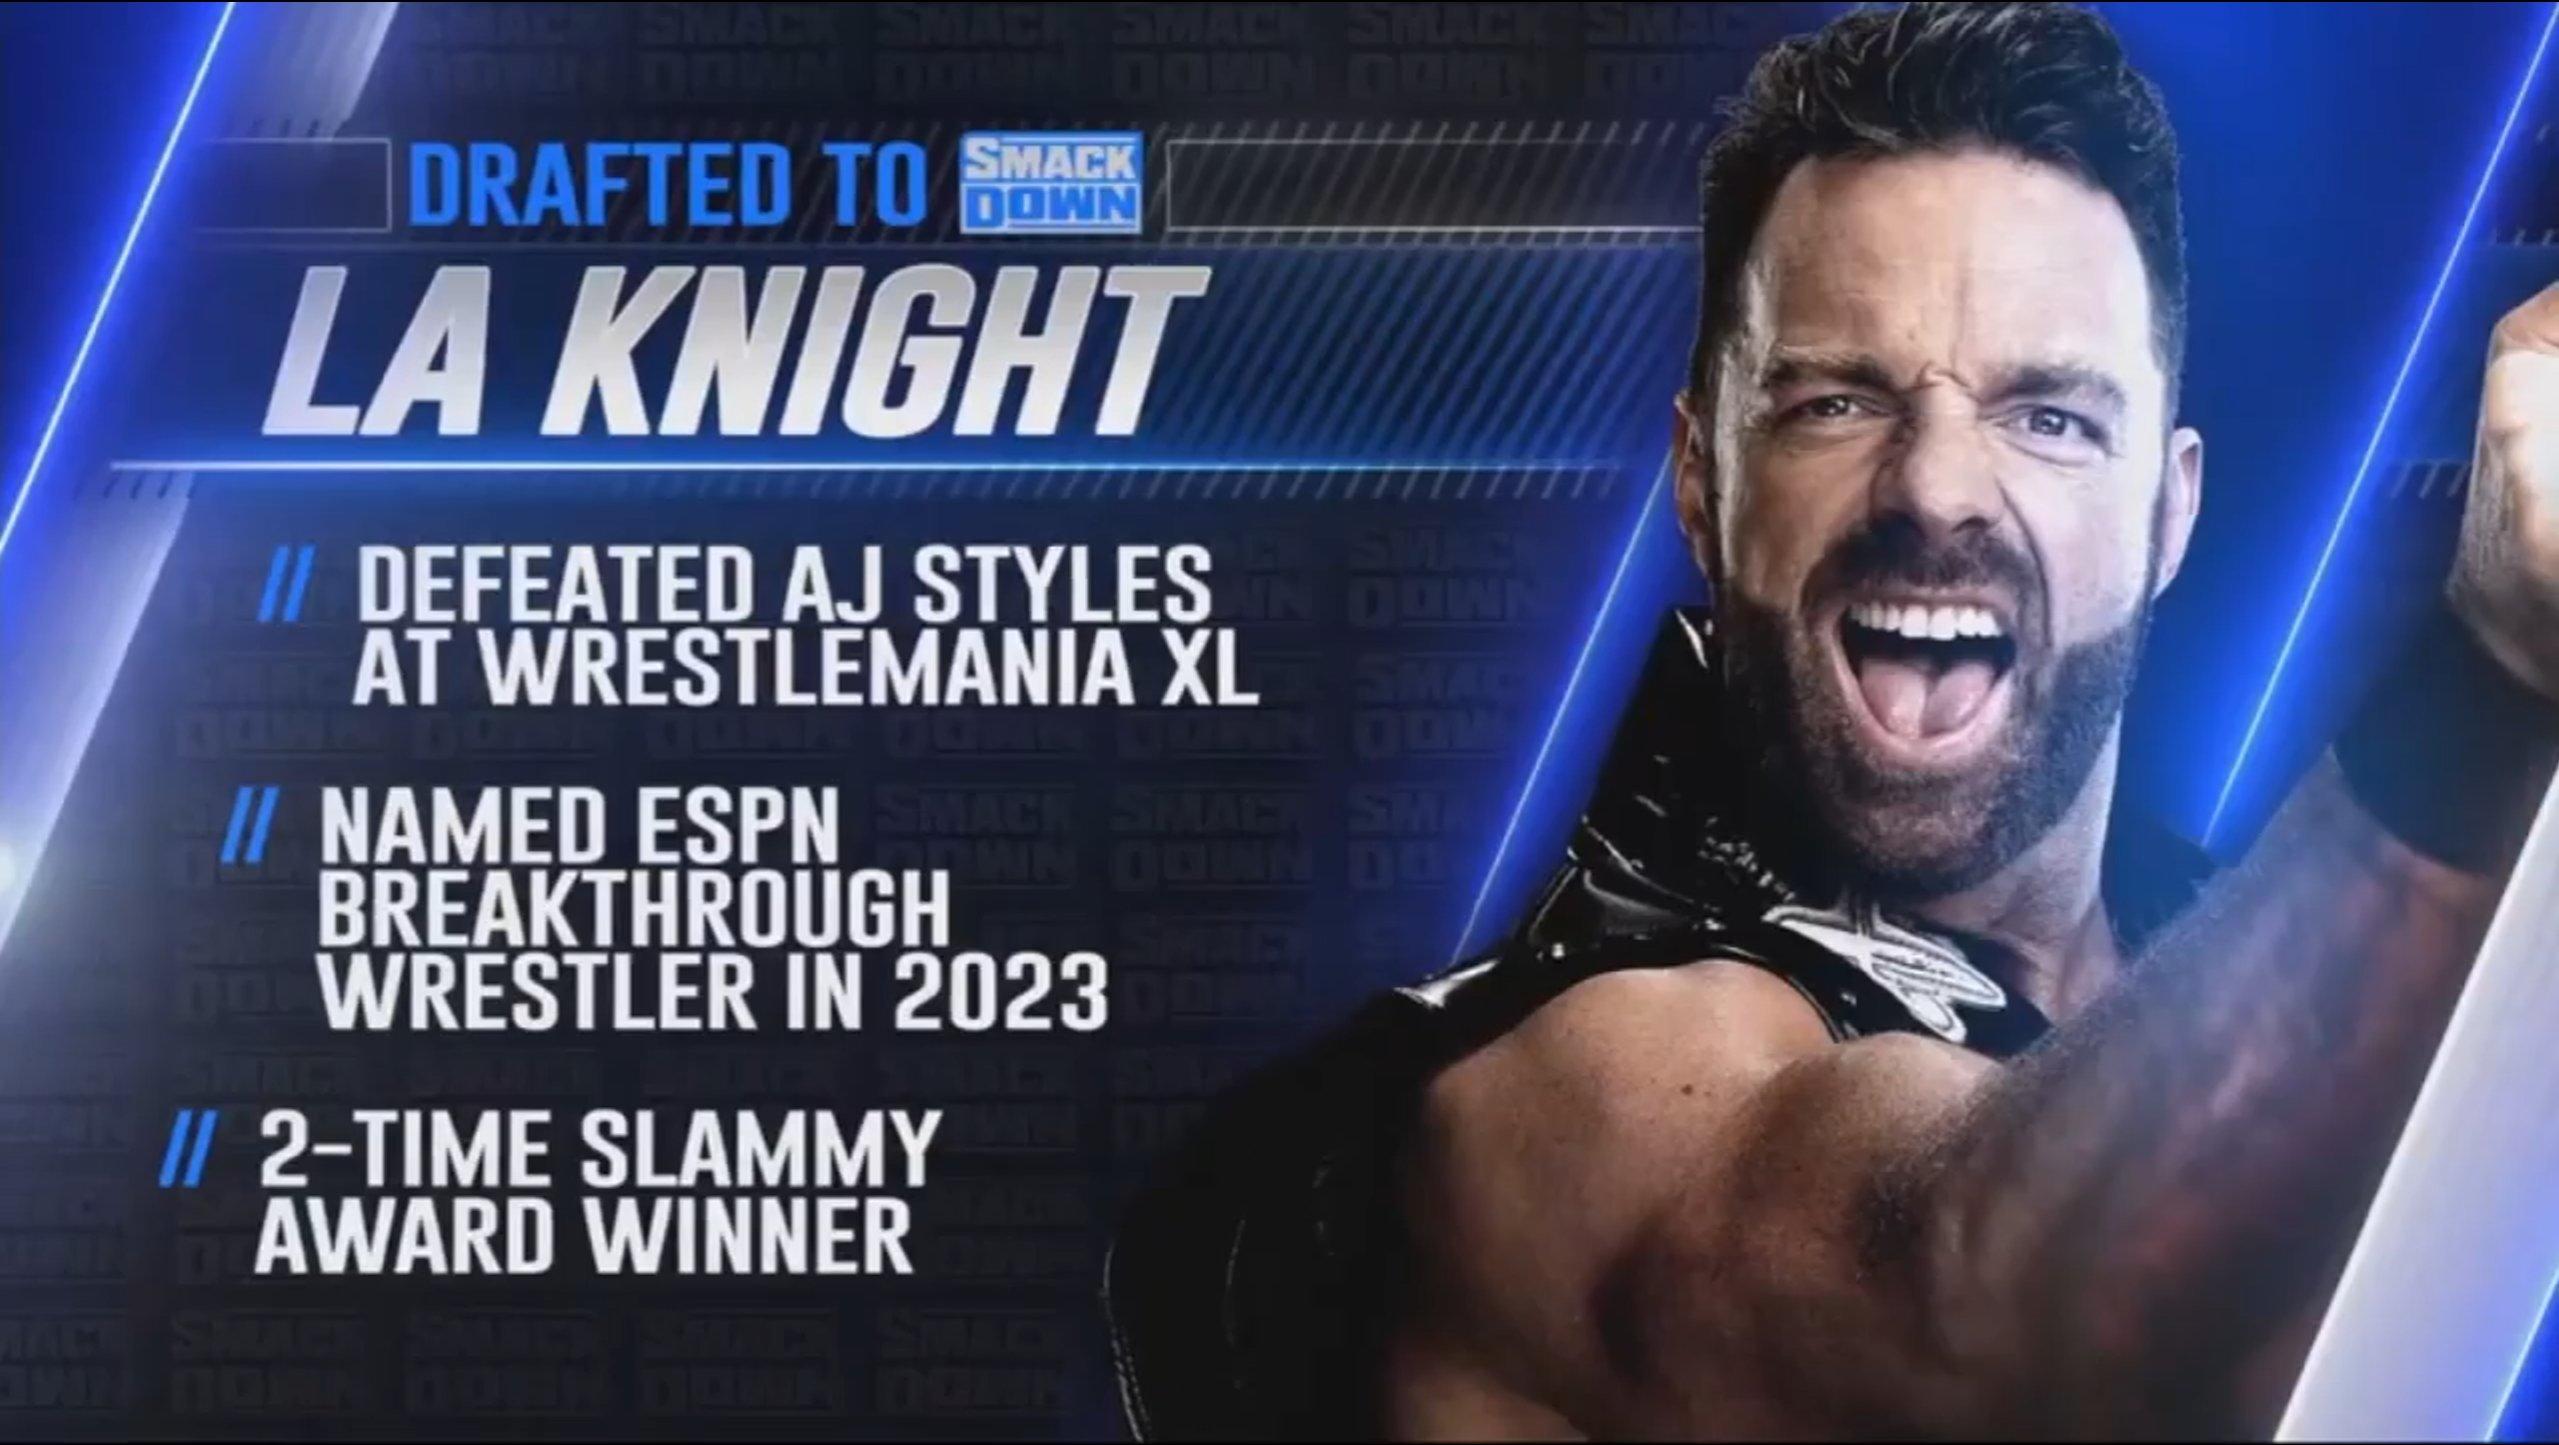 WWE Draft: LA Knight Remains on SmackDown